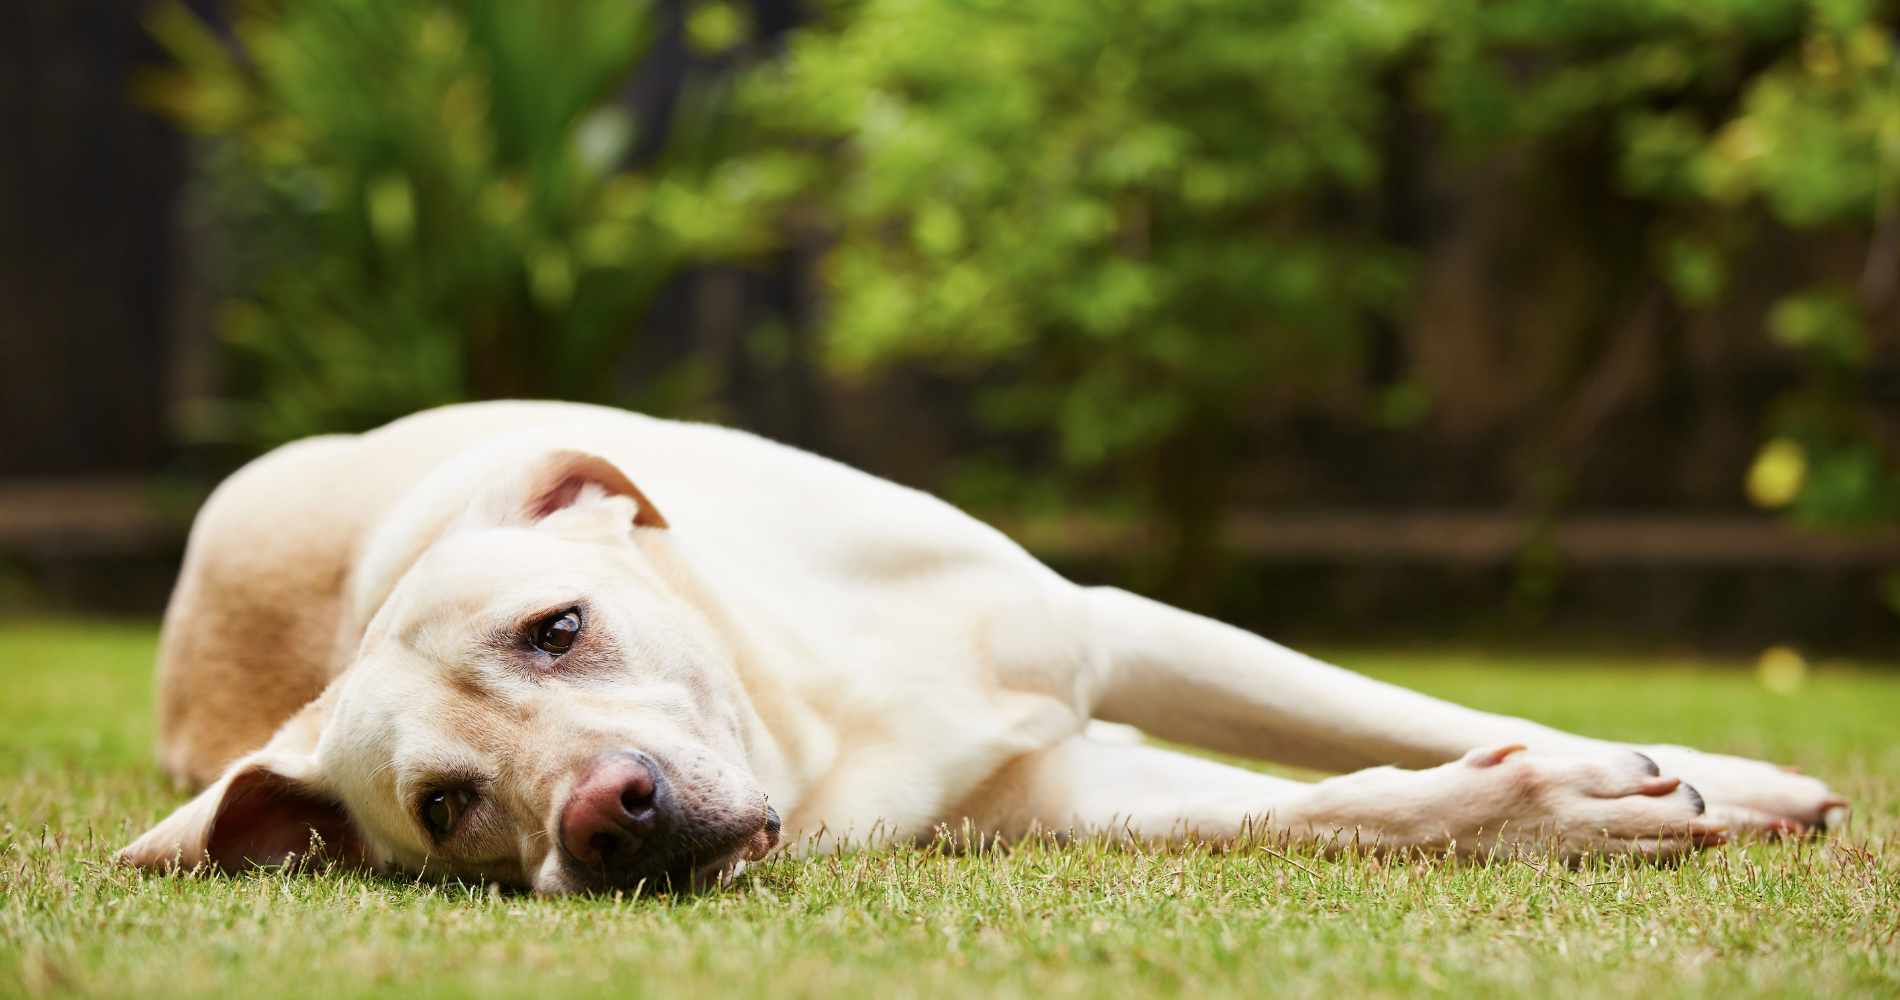 Should You Worry If Your Dog Eats Flies